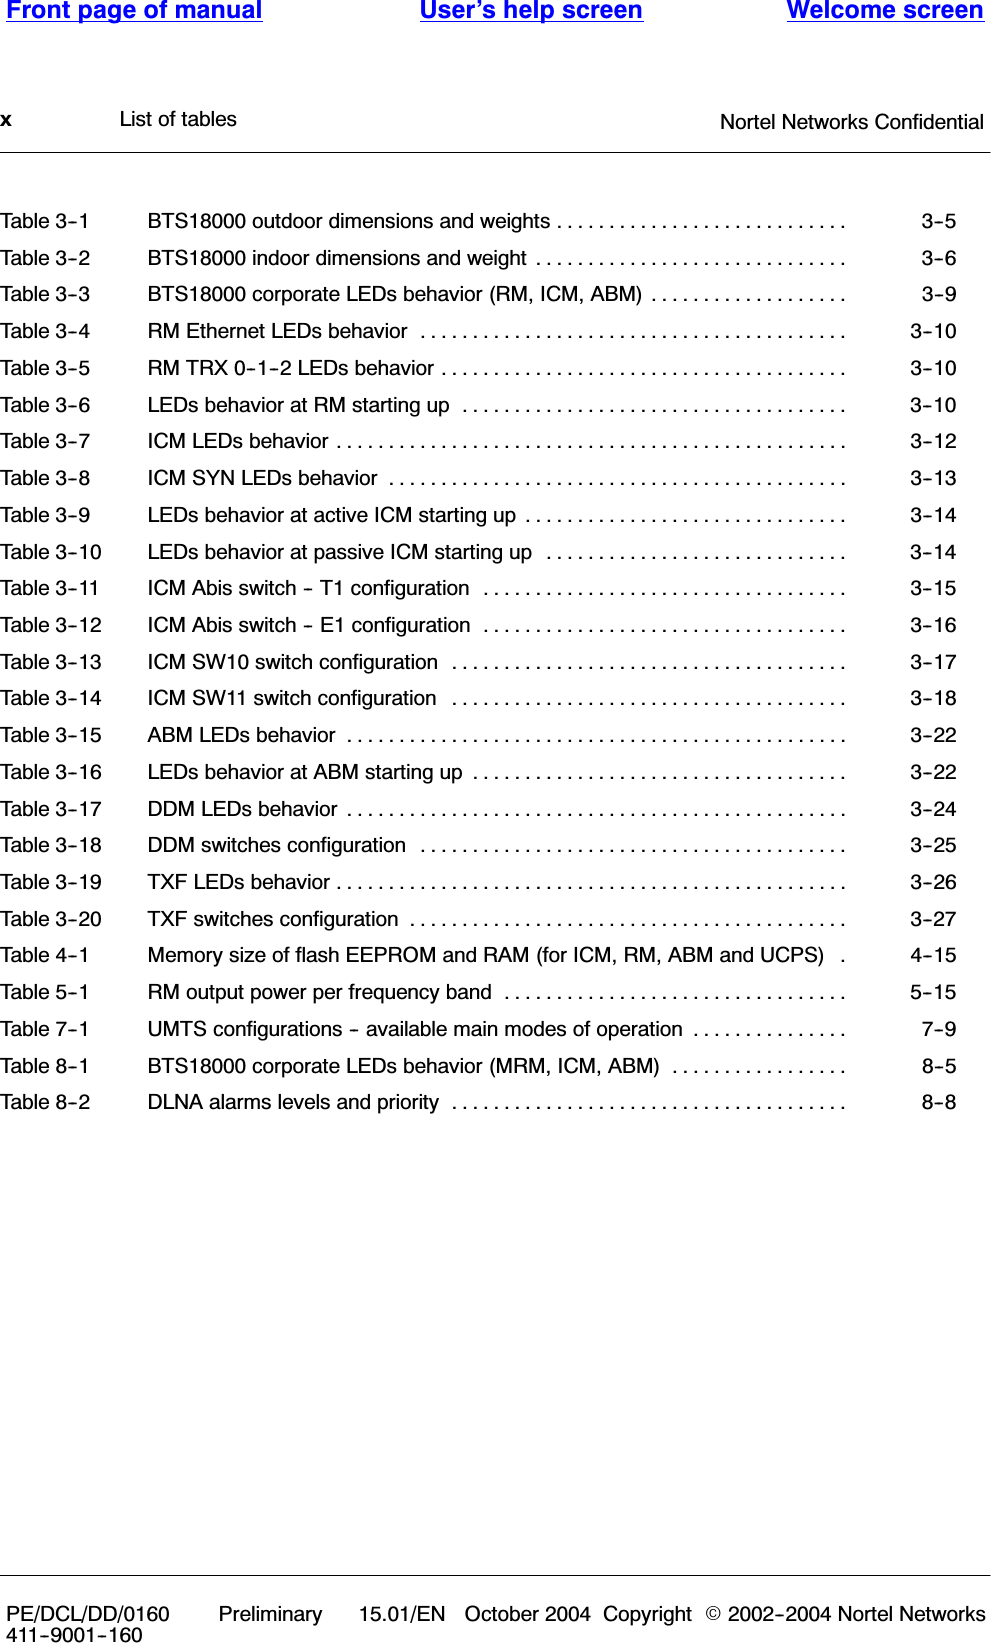 List of tablesFront page of manual Welcome screenUser’s help screenNortel Networks ConfidentialxPE/DCL/DD/0160411--9001--160Preliminary 15.01/EN October 2004 Copyright E2002--2004 Nortel NetworksTable 3--1 BTS18000 outdoor dimensions and weights 3--5............................Table 3--2 BTS18000 indoor dimensions and weight 3--6..............................Table 3--3 BTS18000 corporate LEDs behavior (RM, ICM, ABM) 3--9...................Table 3--4 RM Ethernet LEDs behavior 3--10.........................................Table 3--5 RM TRX 0--1--2 LEDs behavior 3--10.......................................Table 3--6 LEDs behavior at RM starting up 3--10.....................................Table 3--7 ICM LEDs behavior 3--12.................................................Table 3--8 ICM SYN LEDs behavior 3--13............................................Table 3--9 LEDs behavior at active ICM starting up 3--14...............................Table 3--10 LEDs behavior at passive ICM starting up 3--14.............................Table 3--11 ICM Abis switch -- T1 configuration 3--15...................................Table 3--12 ICM Abis switch -- E1 configuration 3--16...................................Table 3--13 ICM SW10 switch configuration 3--17......................................Table 3--14 ICM SW11 switch configuration 3--18......................................Table 3--15 ABM LEDs behavior 3--22................................................Table 3--16 LEDs behavior at ABM starting up 3--22....................................Table 3--17 DDM LEDs behavior 3--24................................................Table 3--18 DDM switches configuration 3--25.........................................Table 3--19 TXF LEDs behavior 3--26.................................................Table 3--20 TXF switches configuration 3--27..........................................Table 4--1 Memory size of flash EEPROM and RAM (for ICM, RM, ABM and UCPS) 4--15.Table 5--1 RM output power per frequency band 5--15.................................Table 7--1 UMTS configurations -- available main modes of operation 7--9...............Table 8--1 BTS18000 corporate LEDs behavior (MRM, ICM, ABM) 8--5.................Table 8--2 DLNA alarms levels and priority 8--8......................................